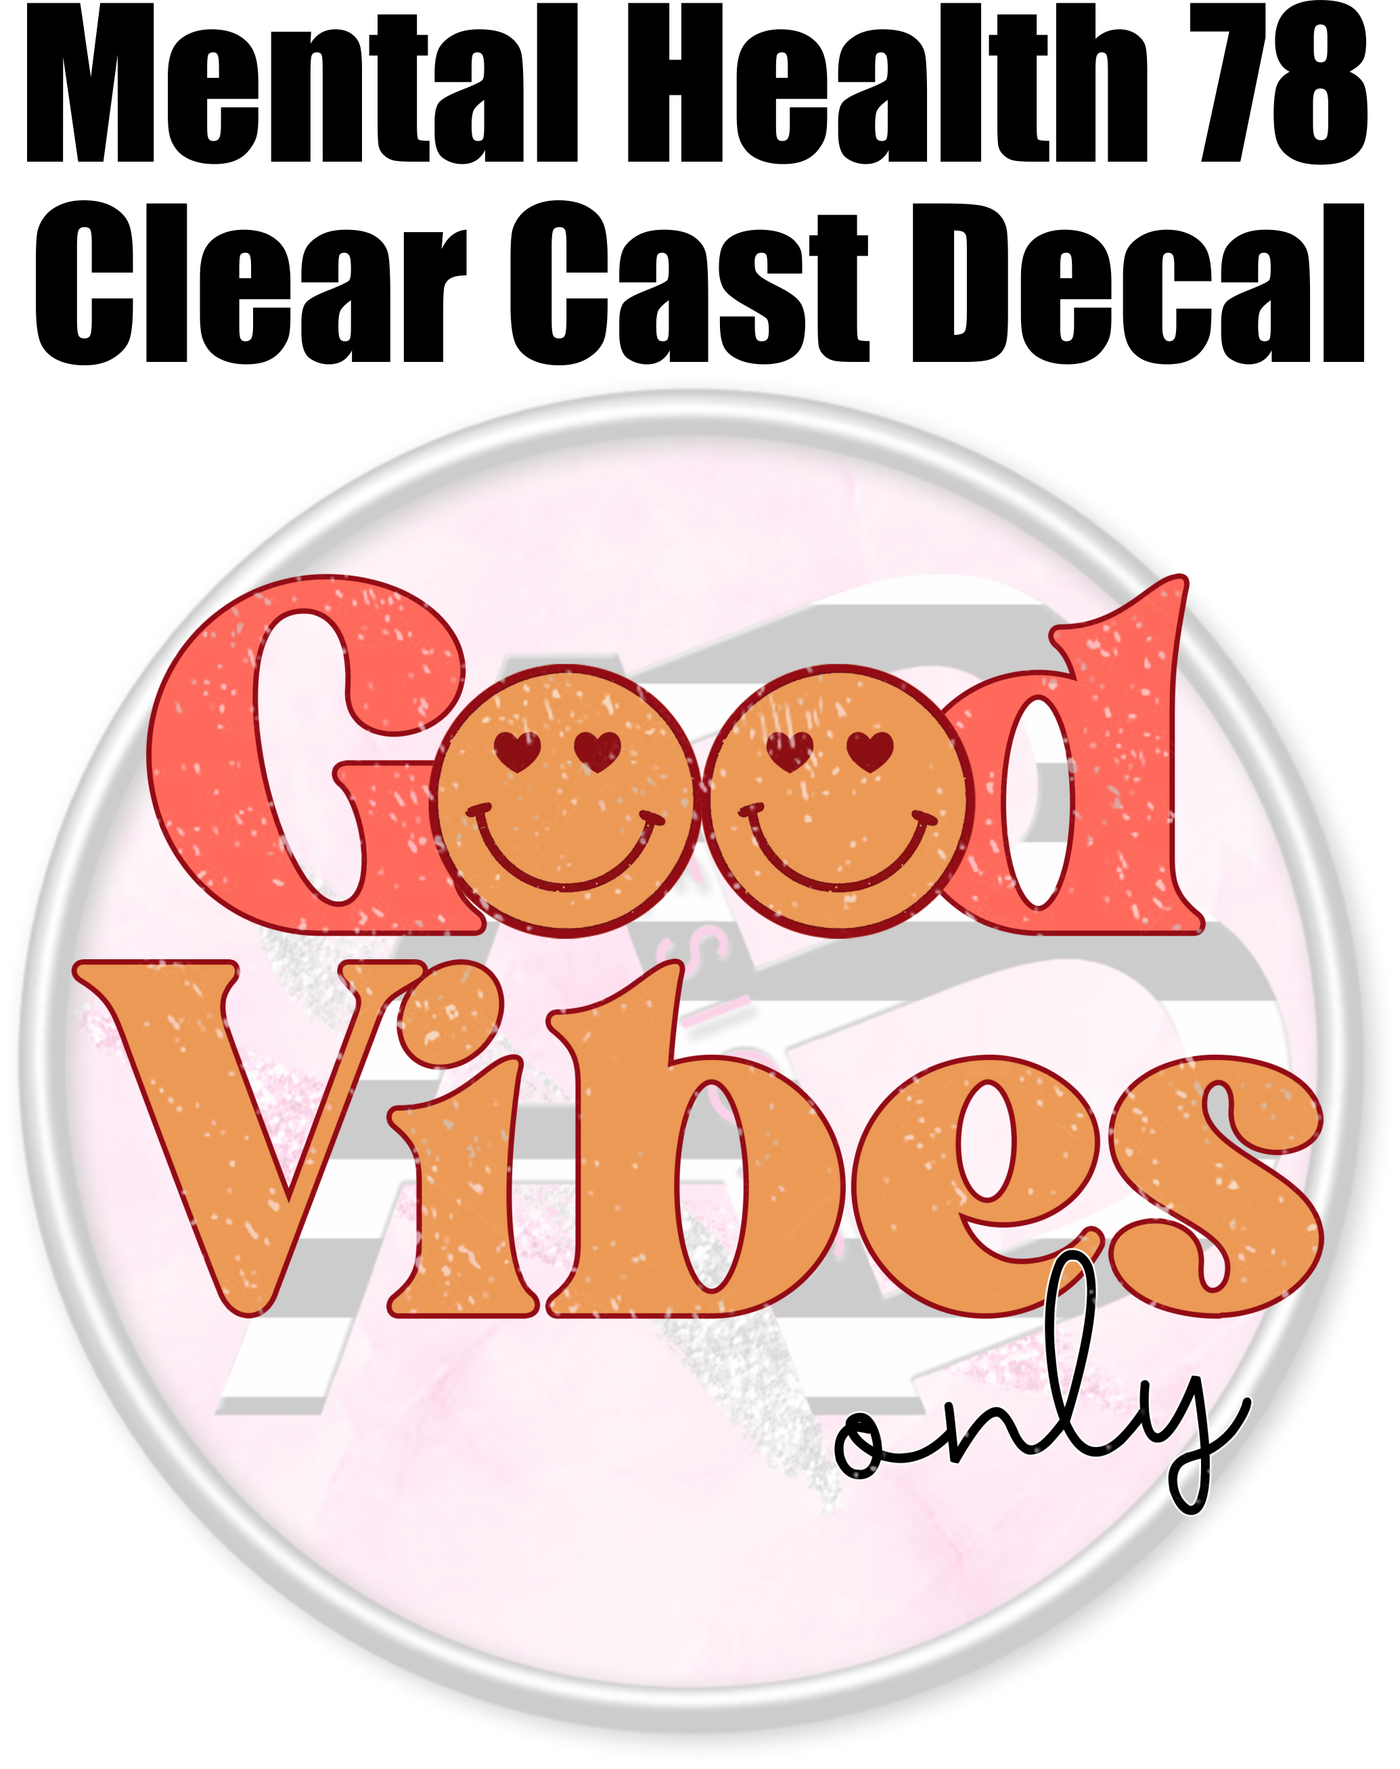 Mental Health 78 - Clear Cast Decal-462